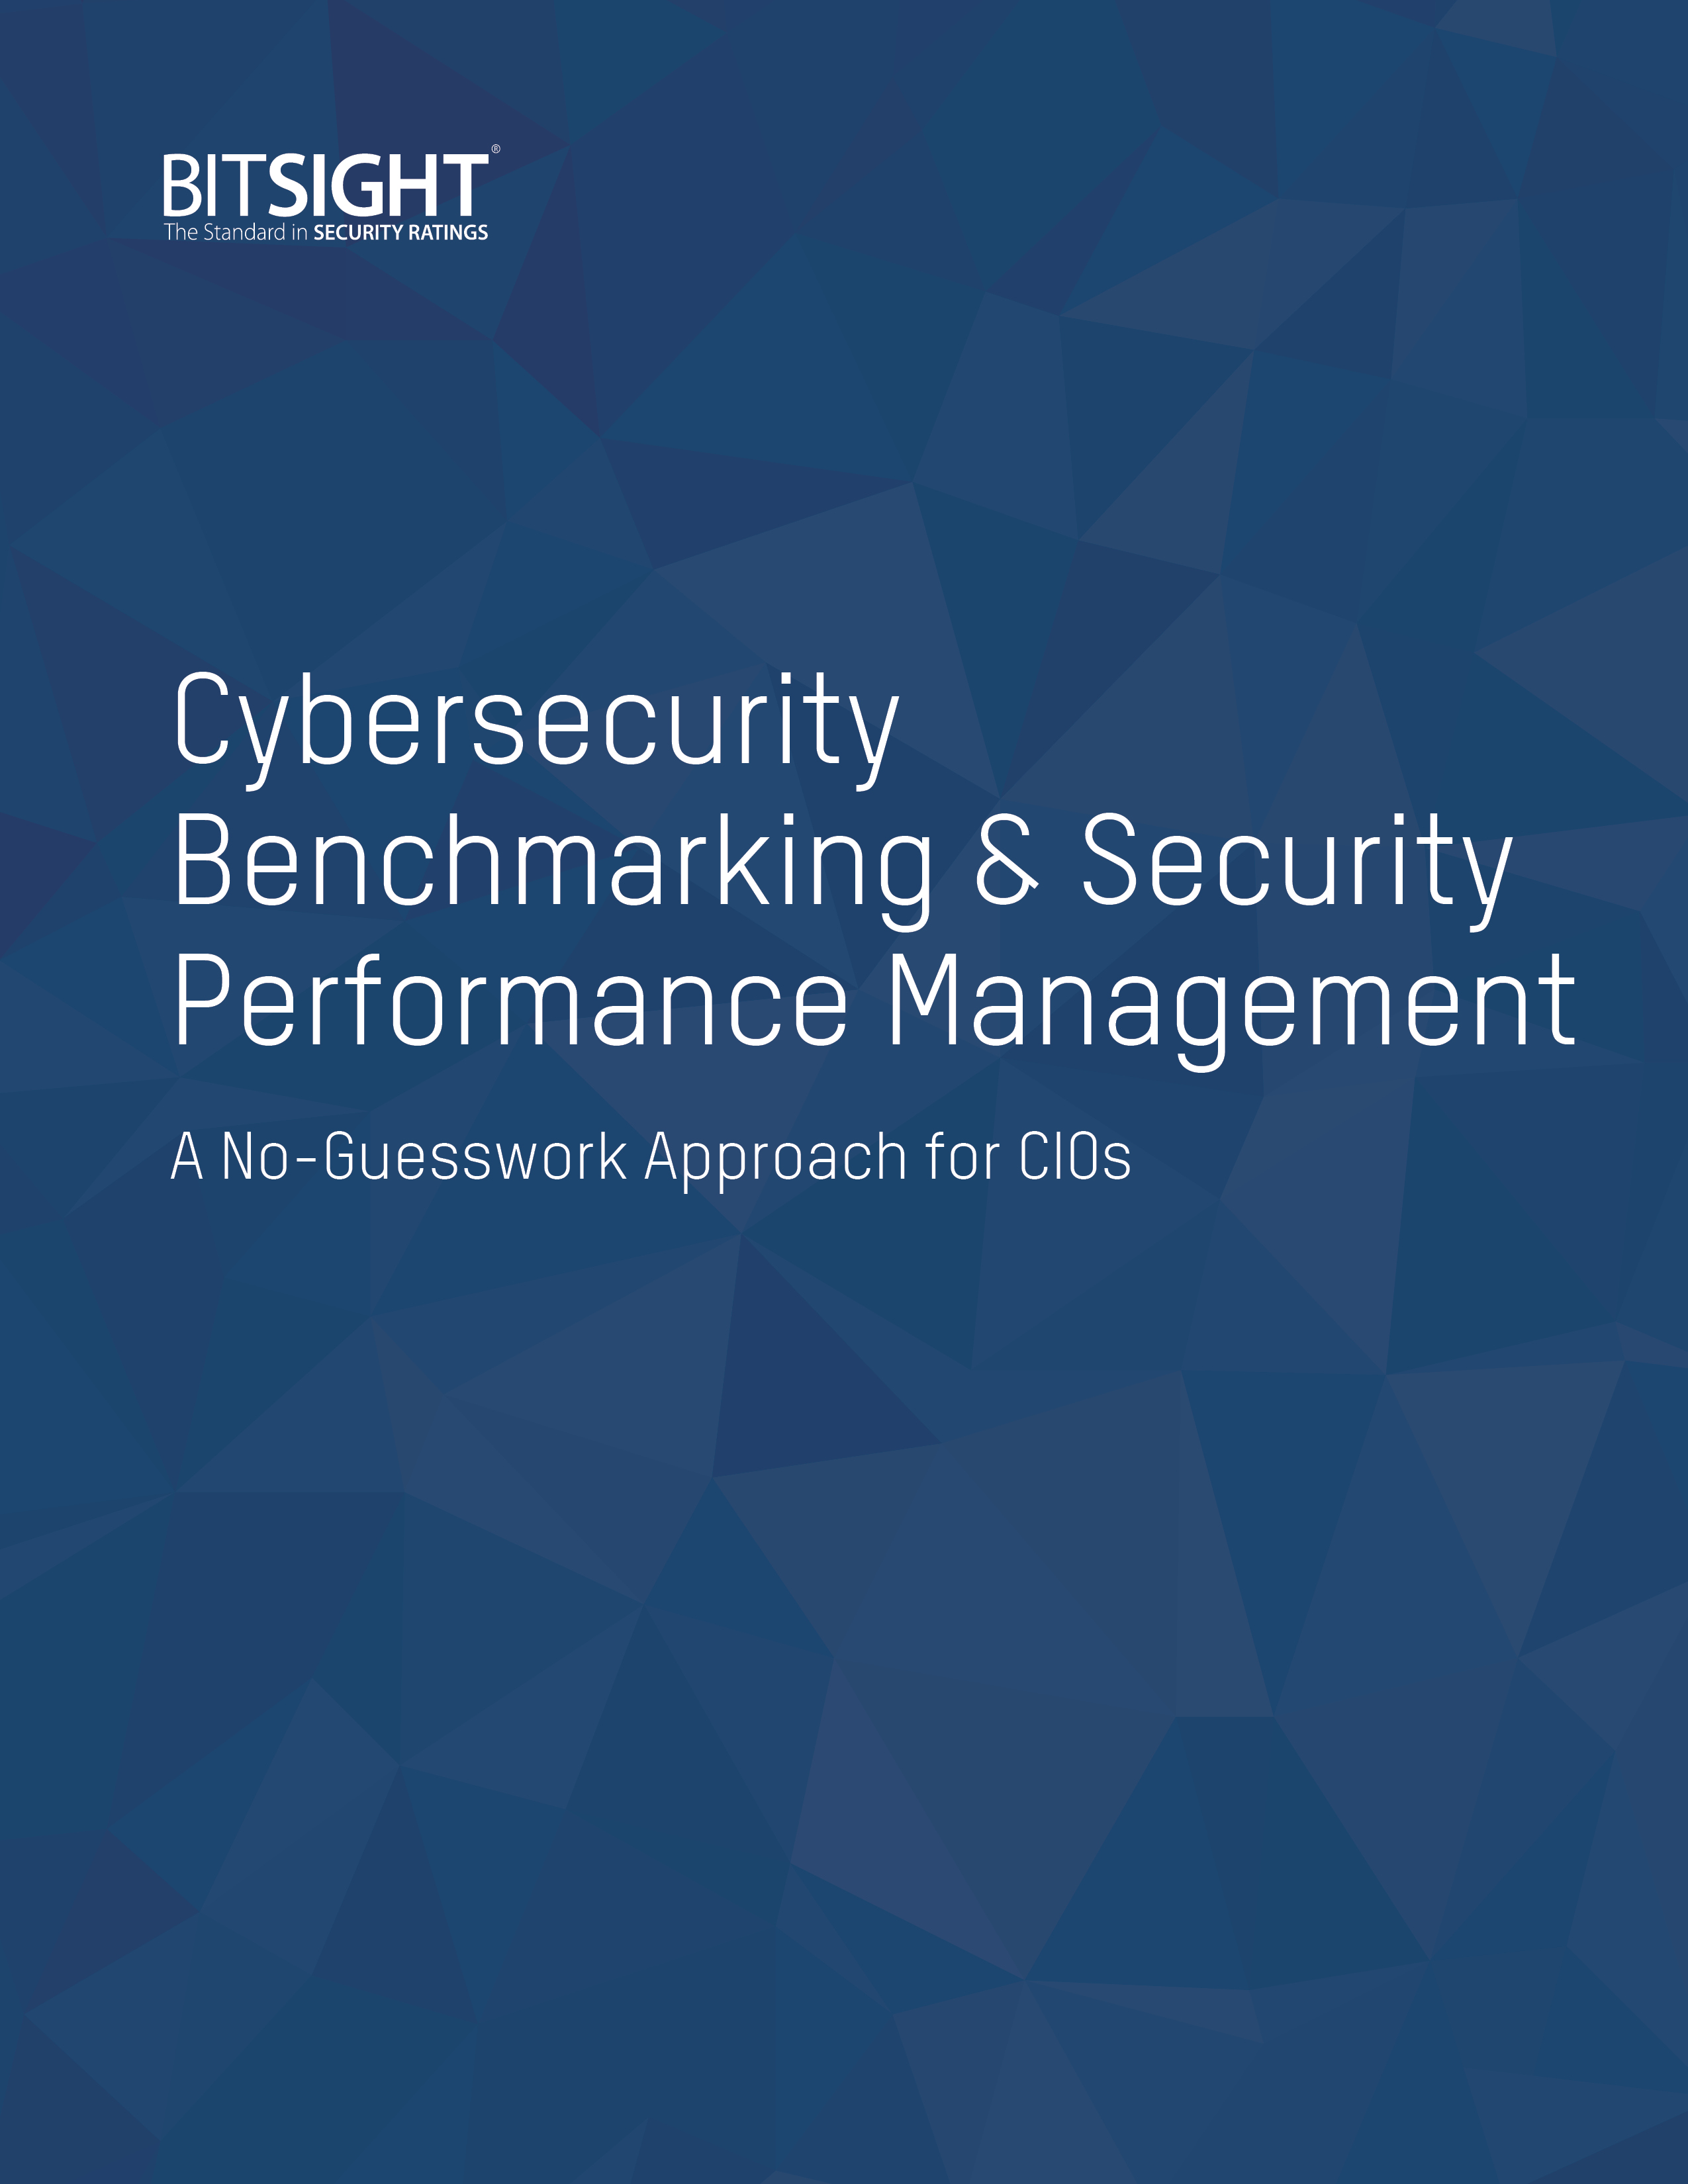 Cybersecurity Benchmarking & Security Performance Management